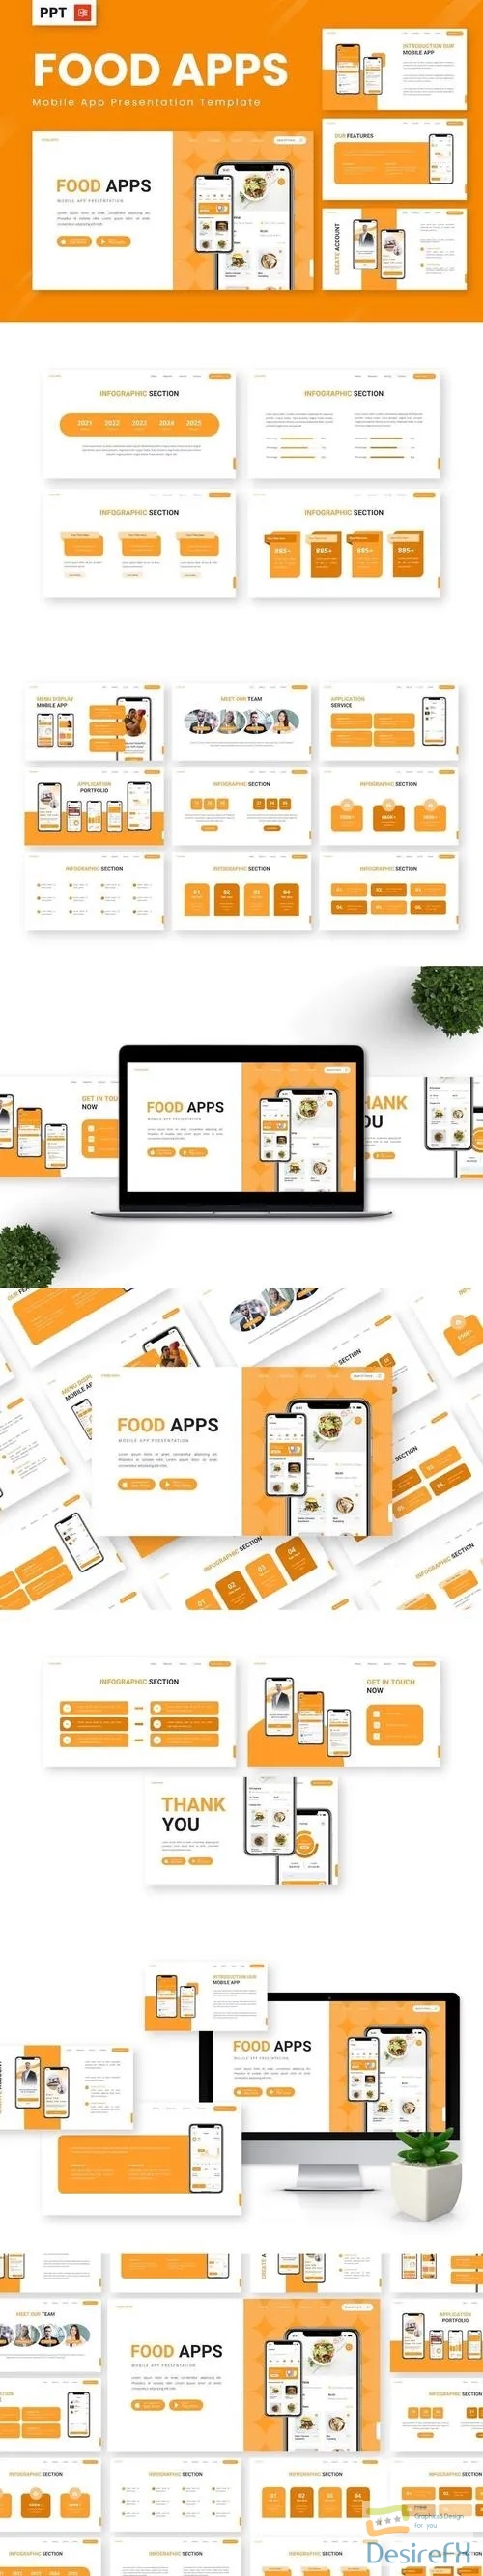 Food Apps - Mobile App Powerpoint Templates